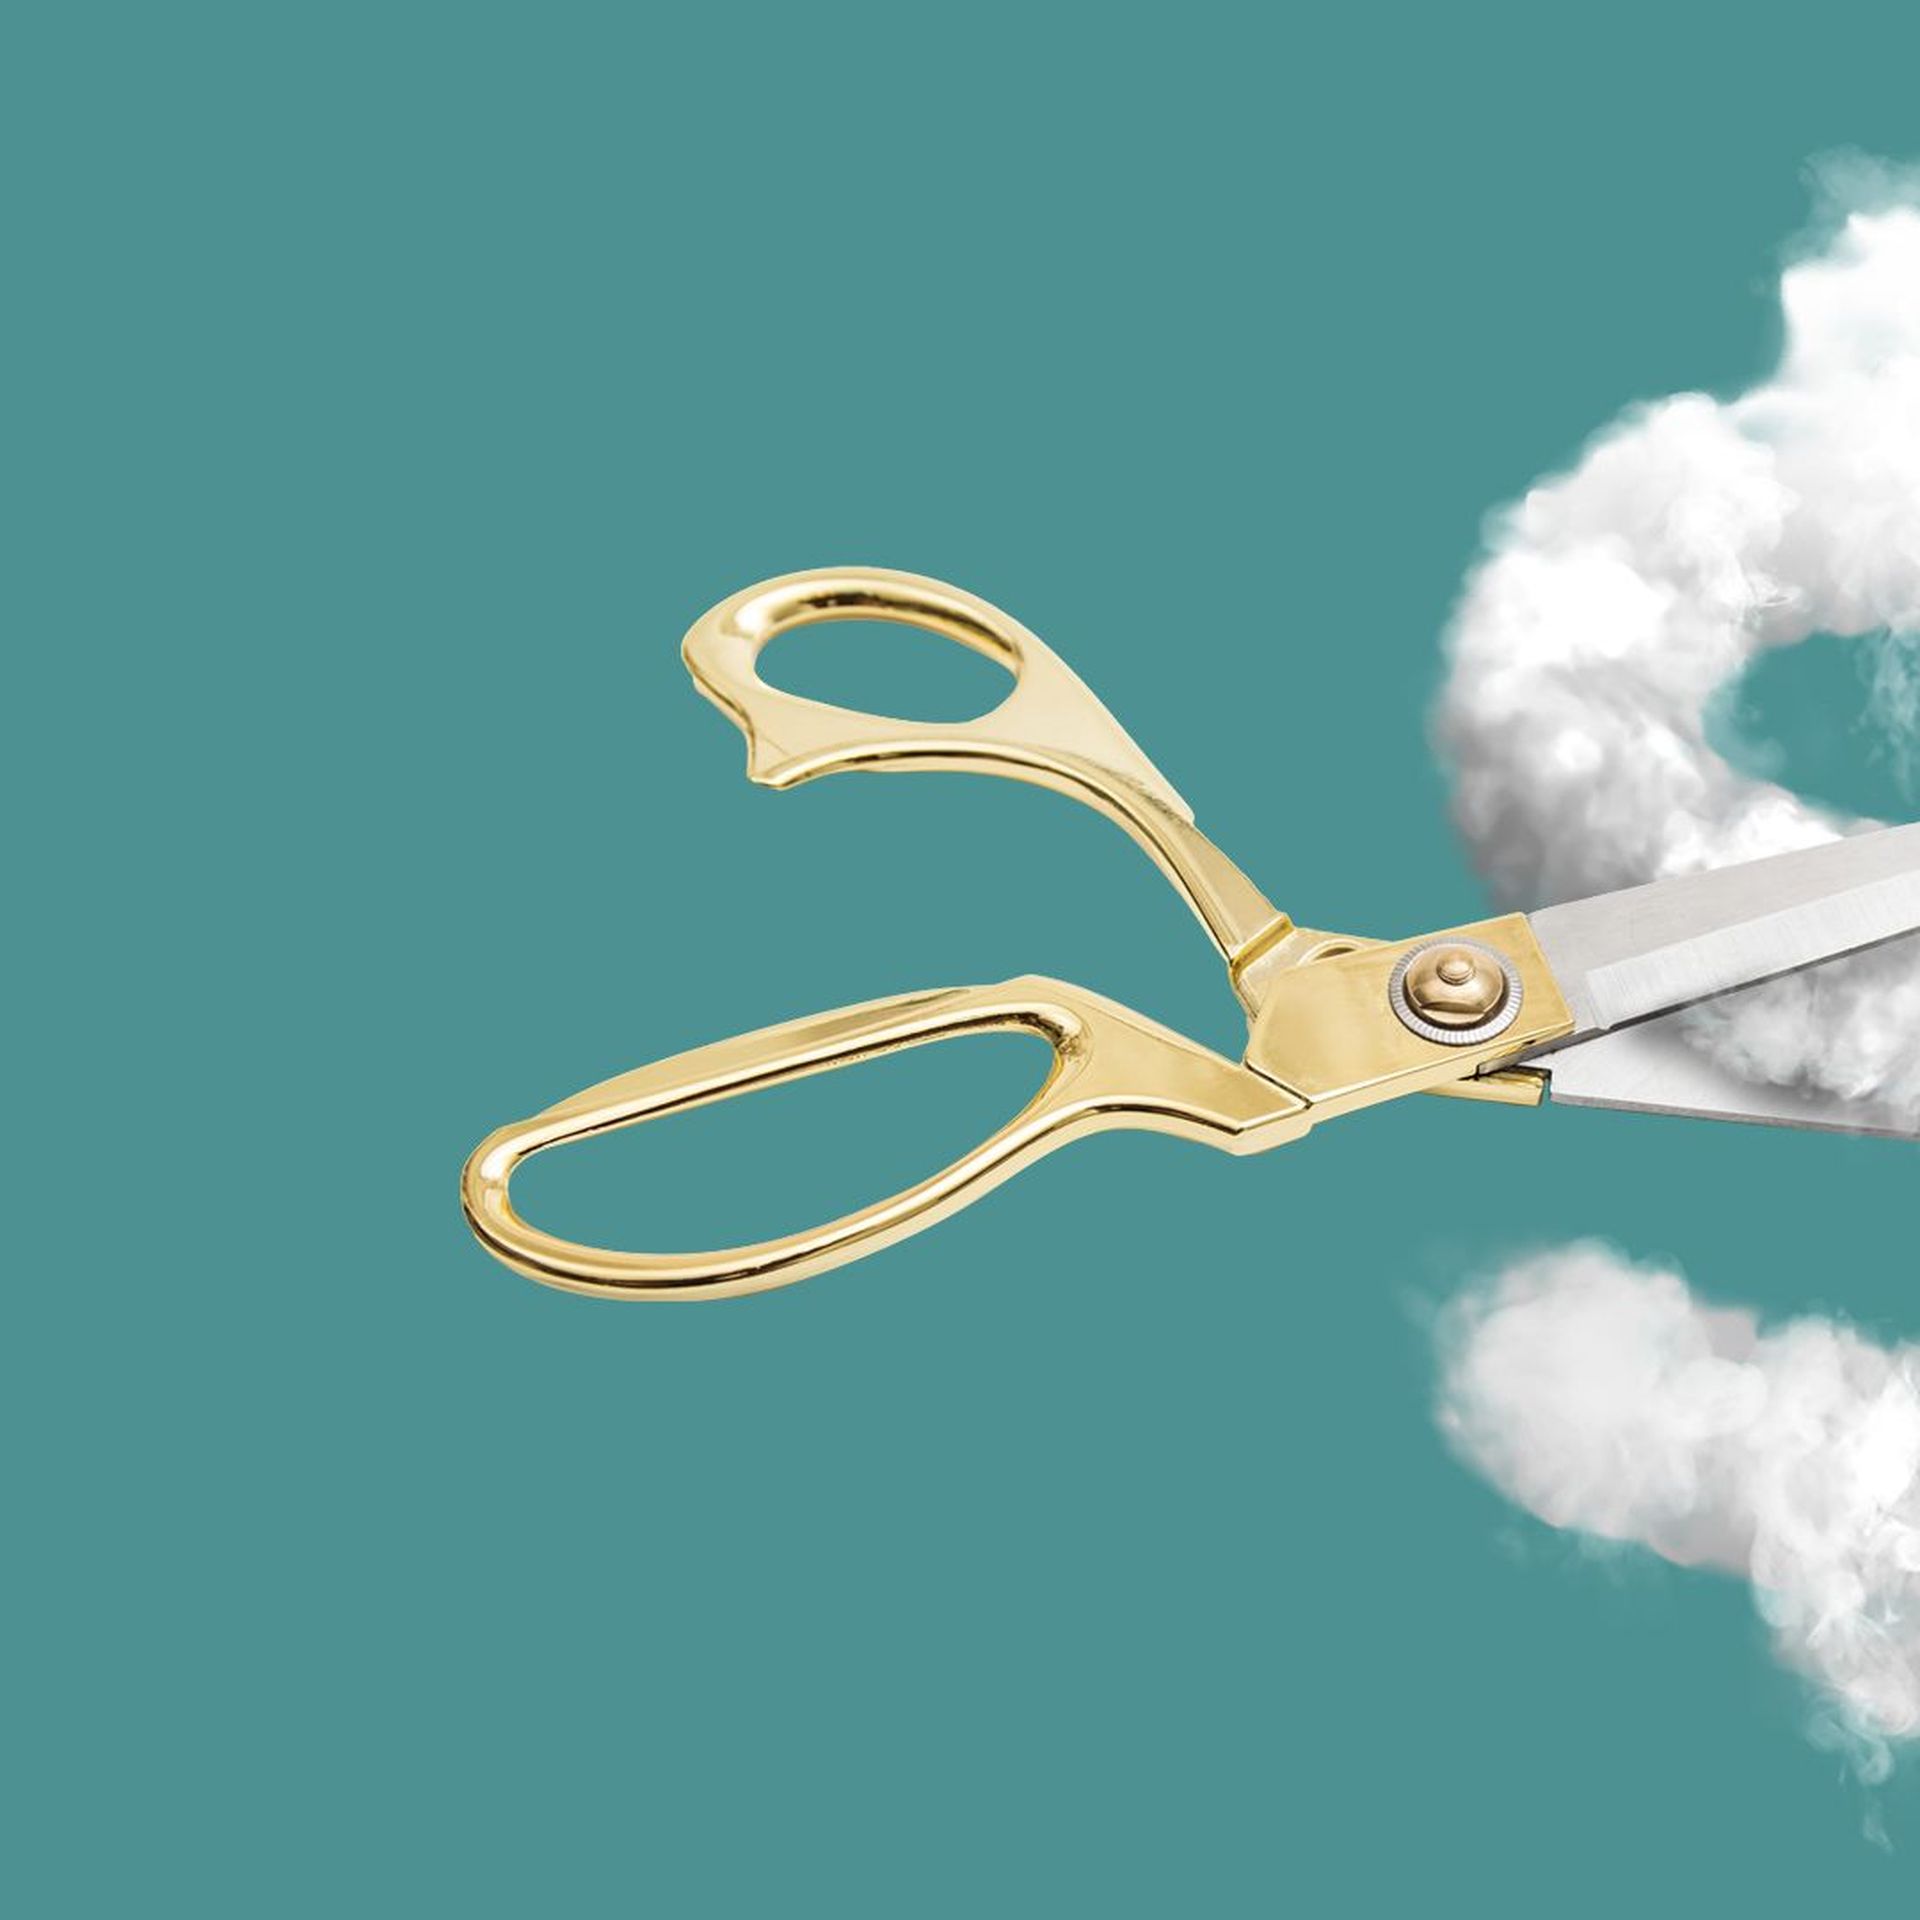 Illustration of scissors cutting a dollar sign made of smoke